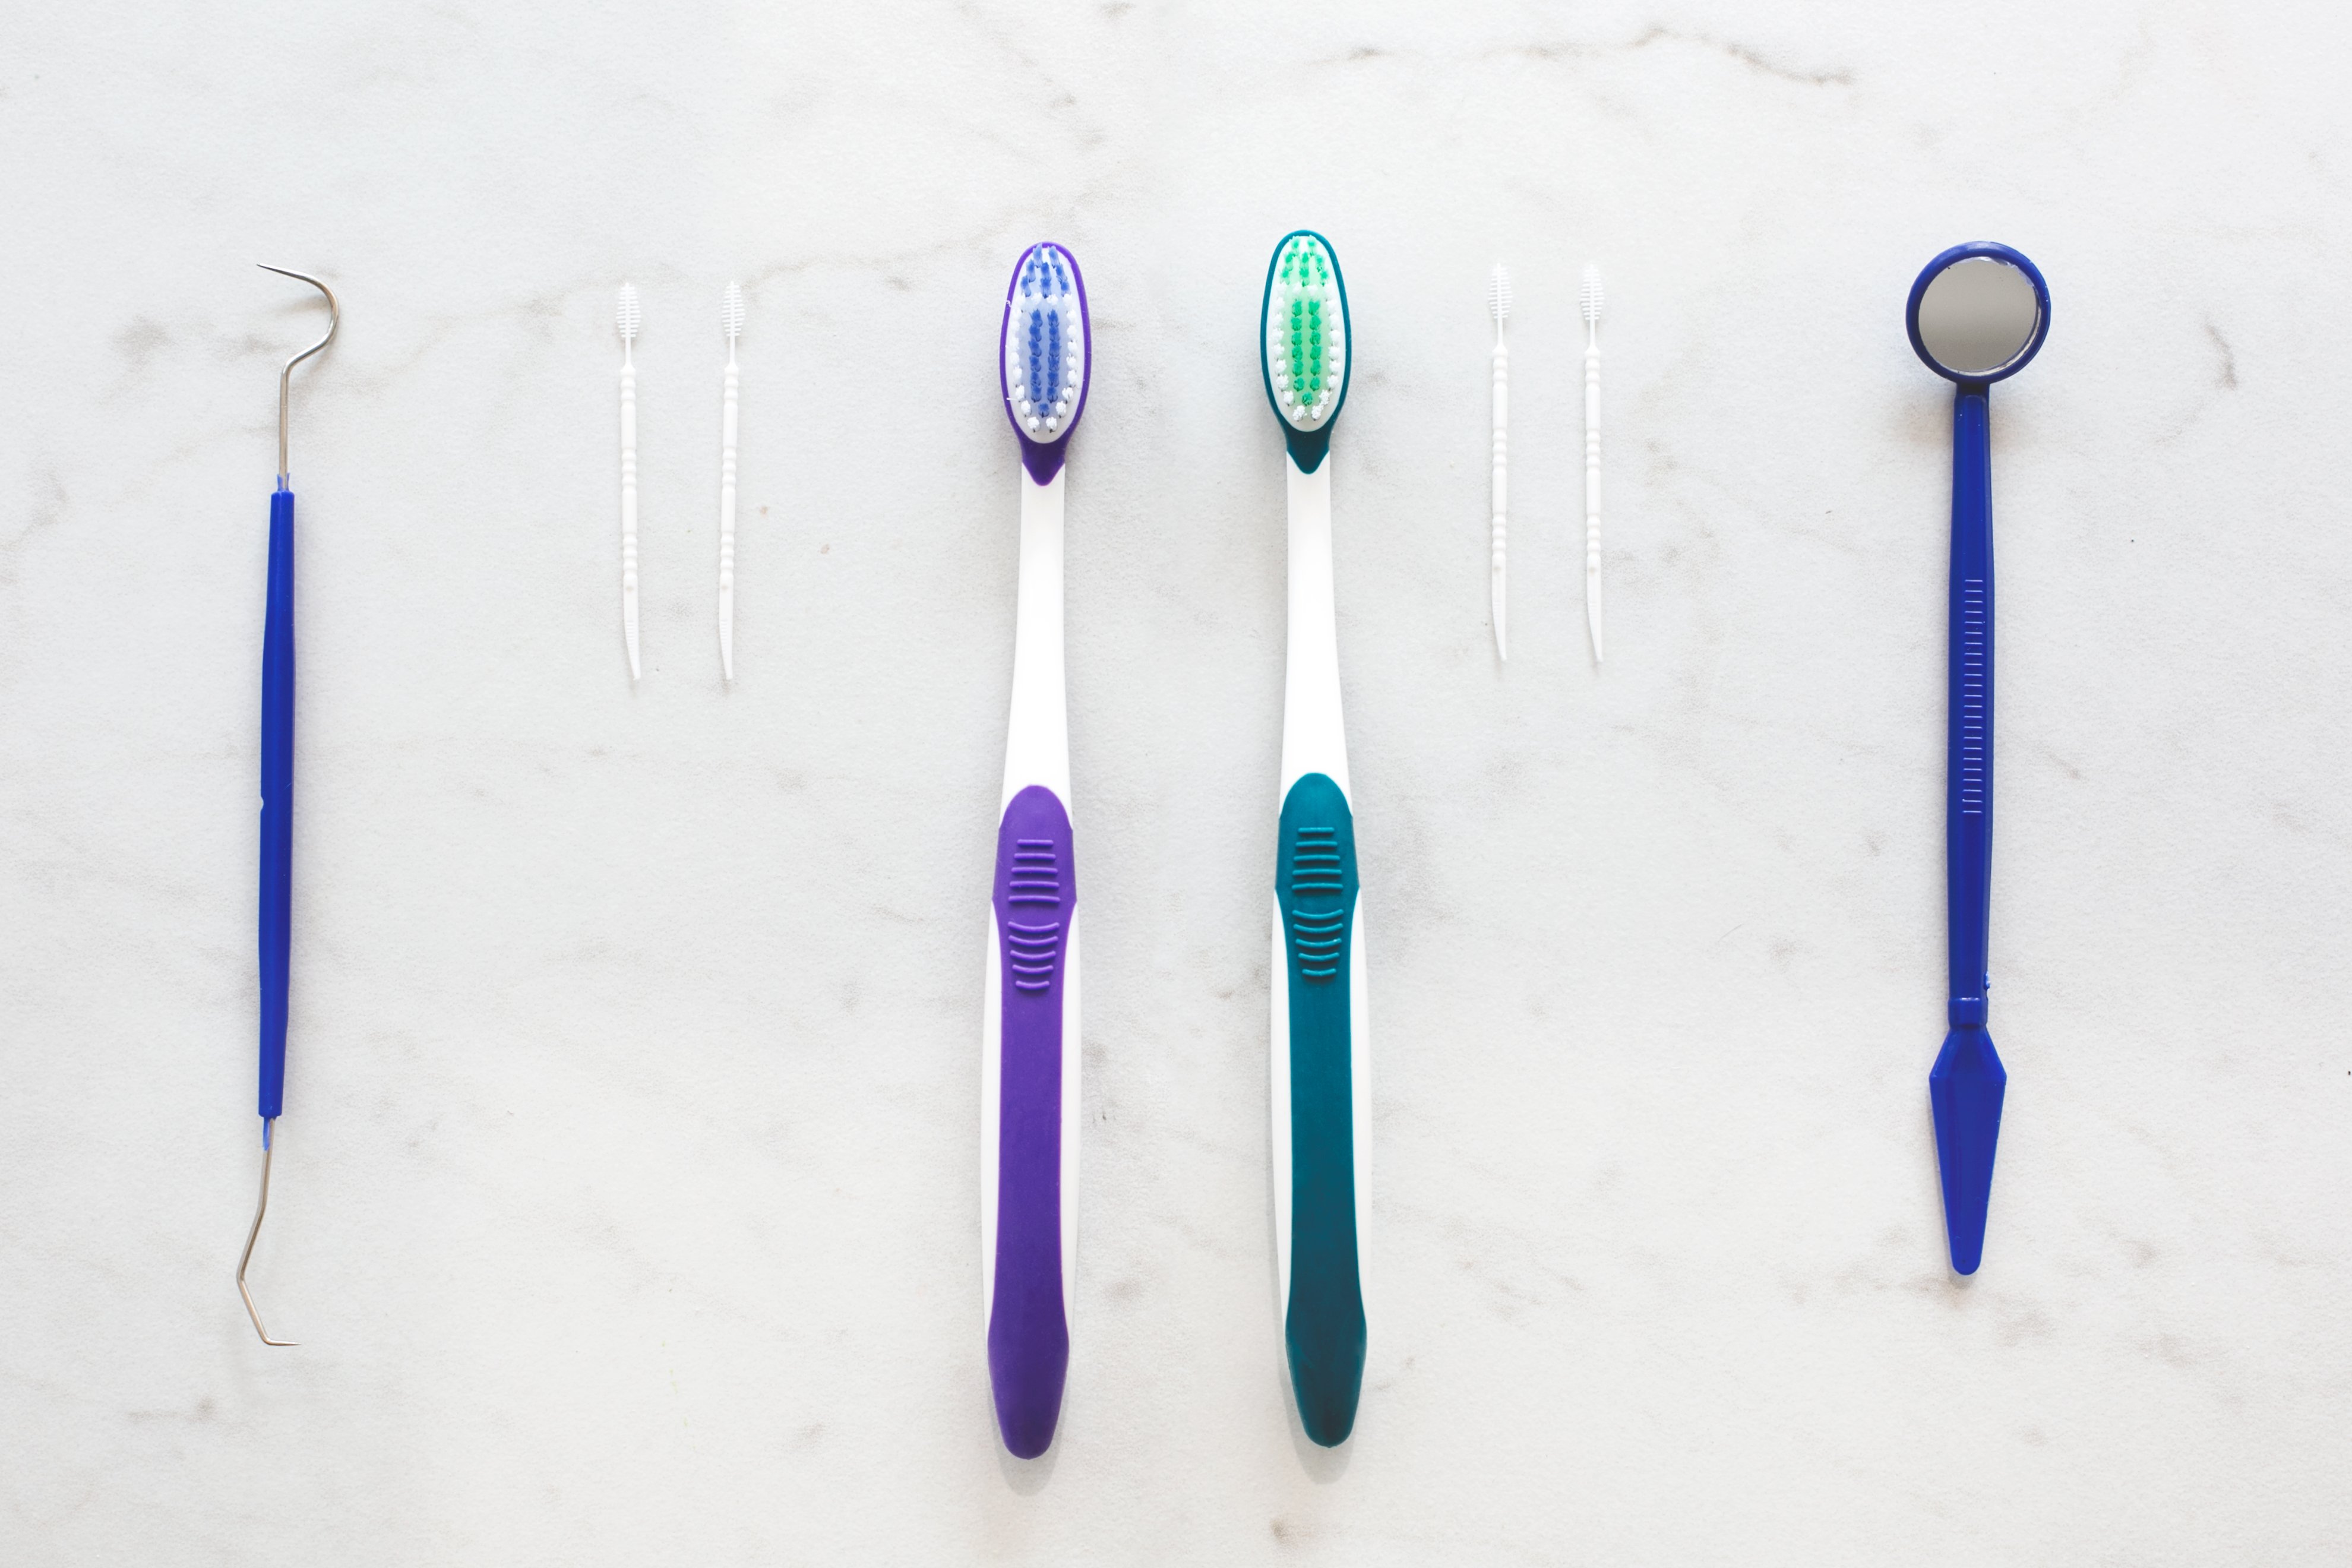 Dental care tools on marble countertop